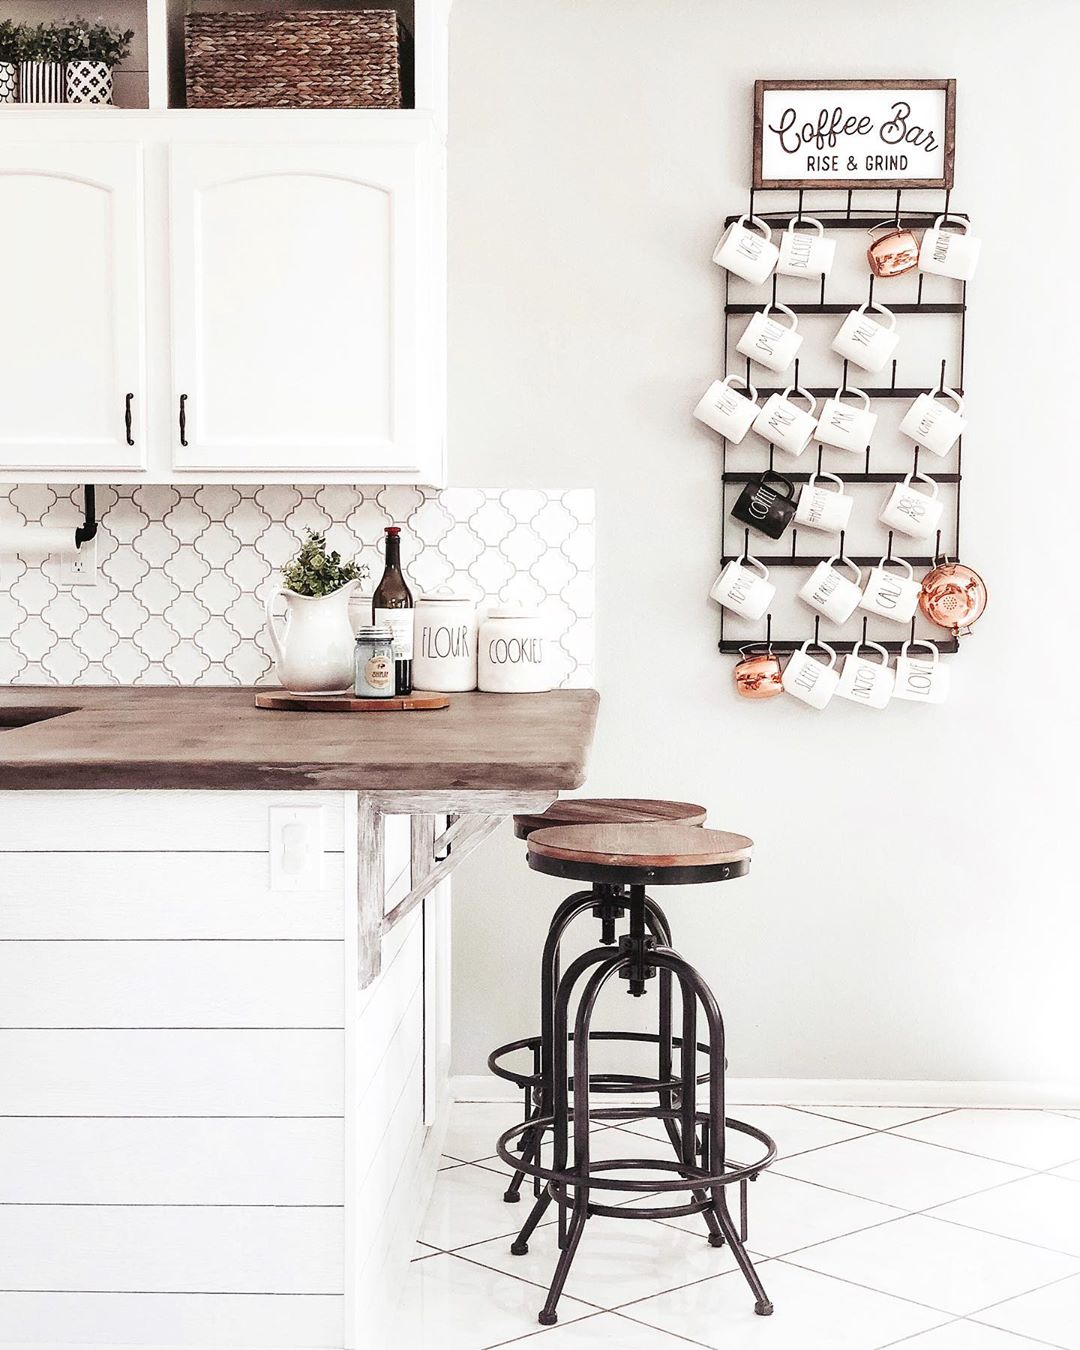 Hanging coffee mug rack on kitchen wall. Photo by Instagram user @fiddleleafinteriors